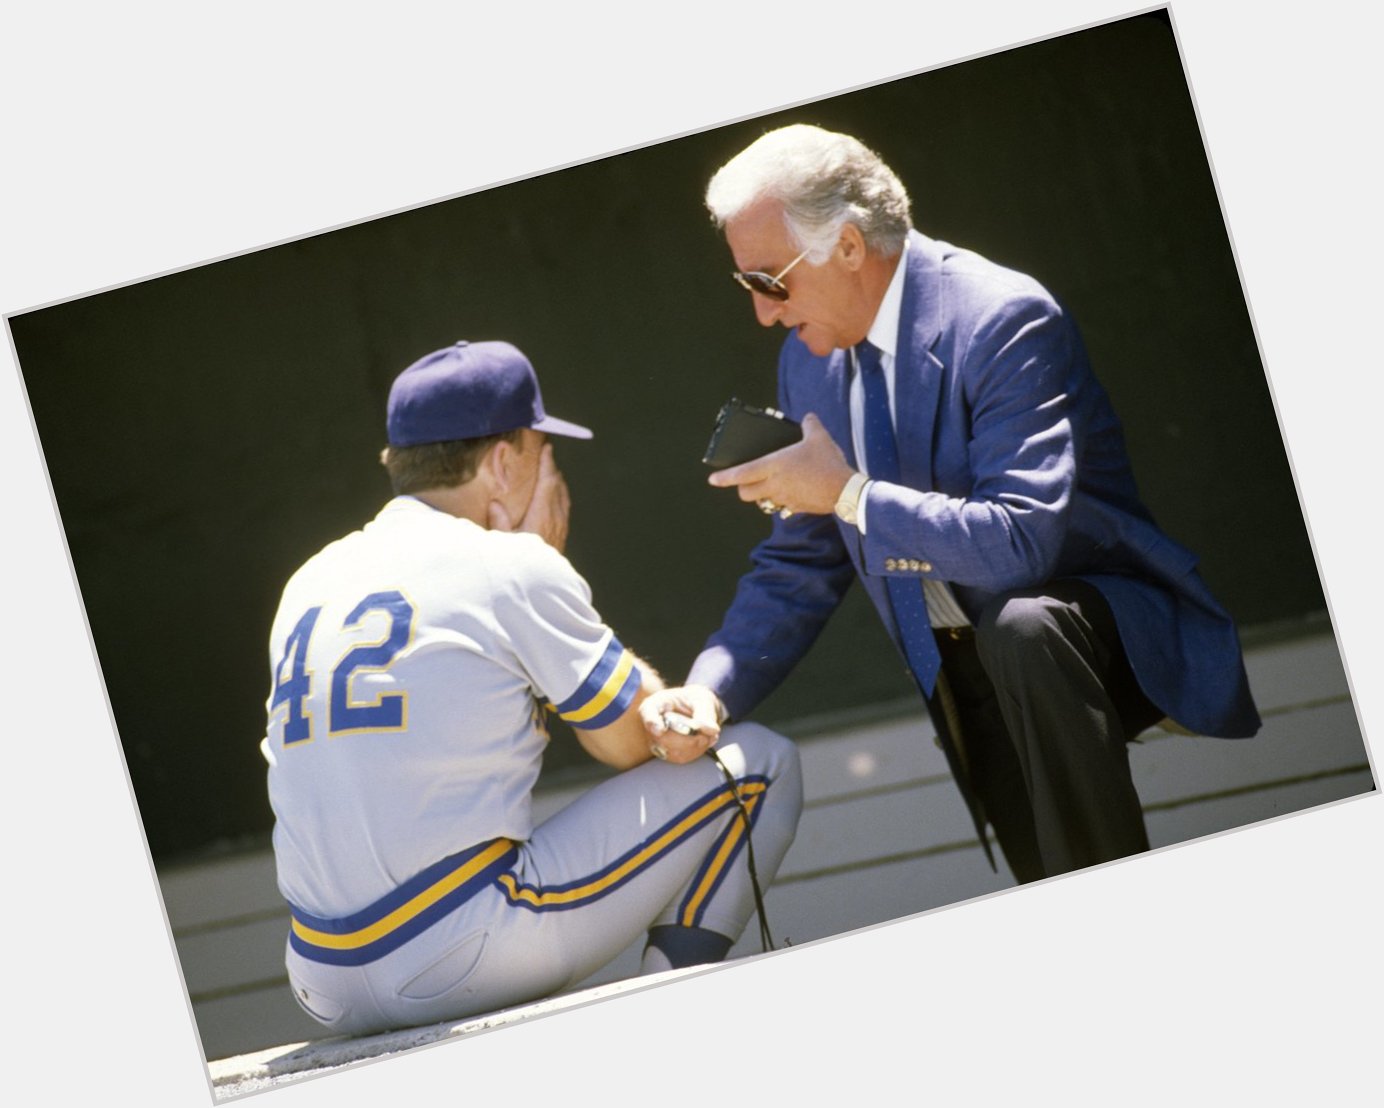 Happy birthday to the one, the only, Bob Uecker!  